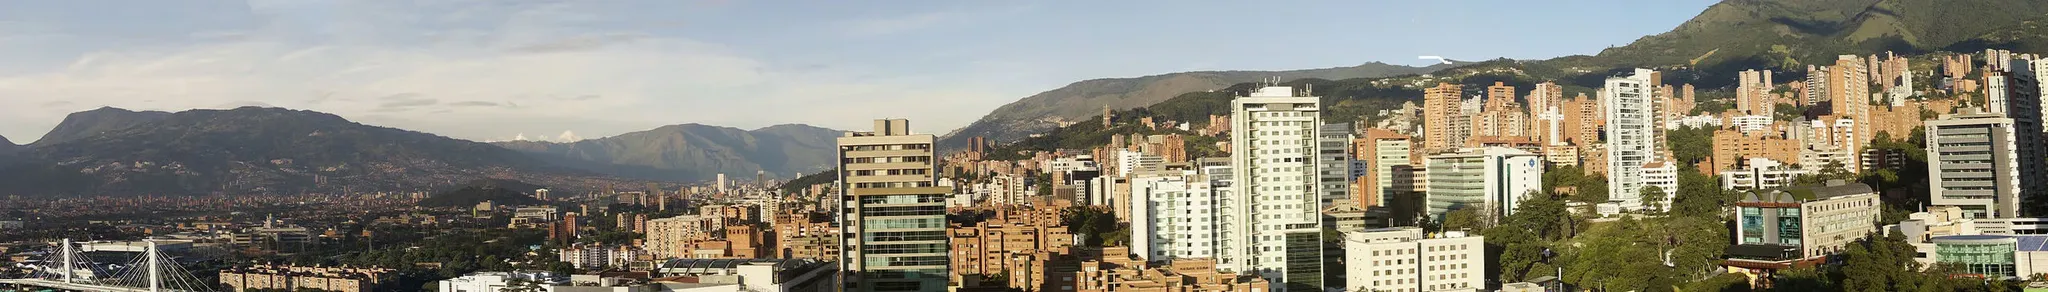 Medellin | Antioquia Region, Colombia - Rated 7.7